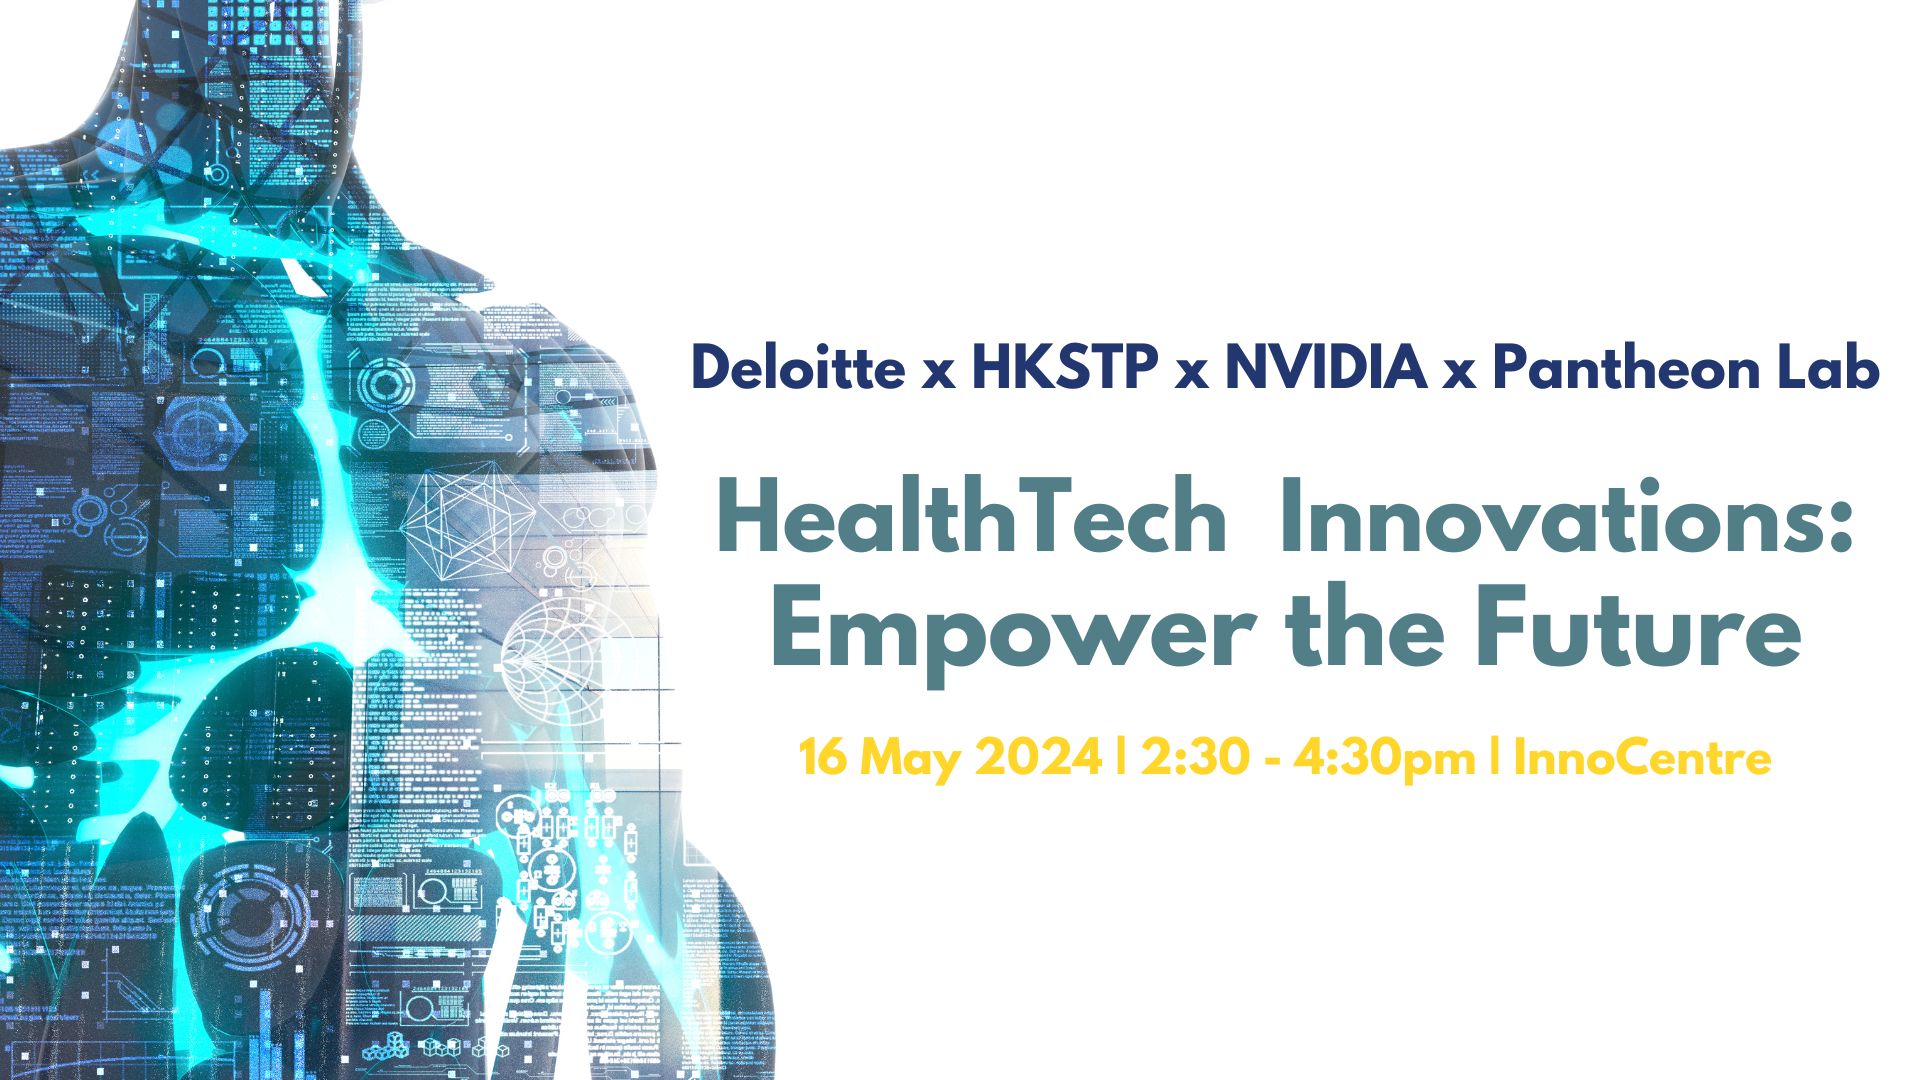 healthtech-innovations-empowering-the-future